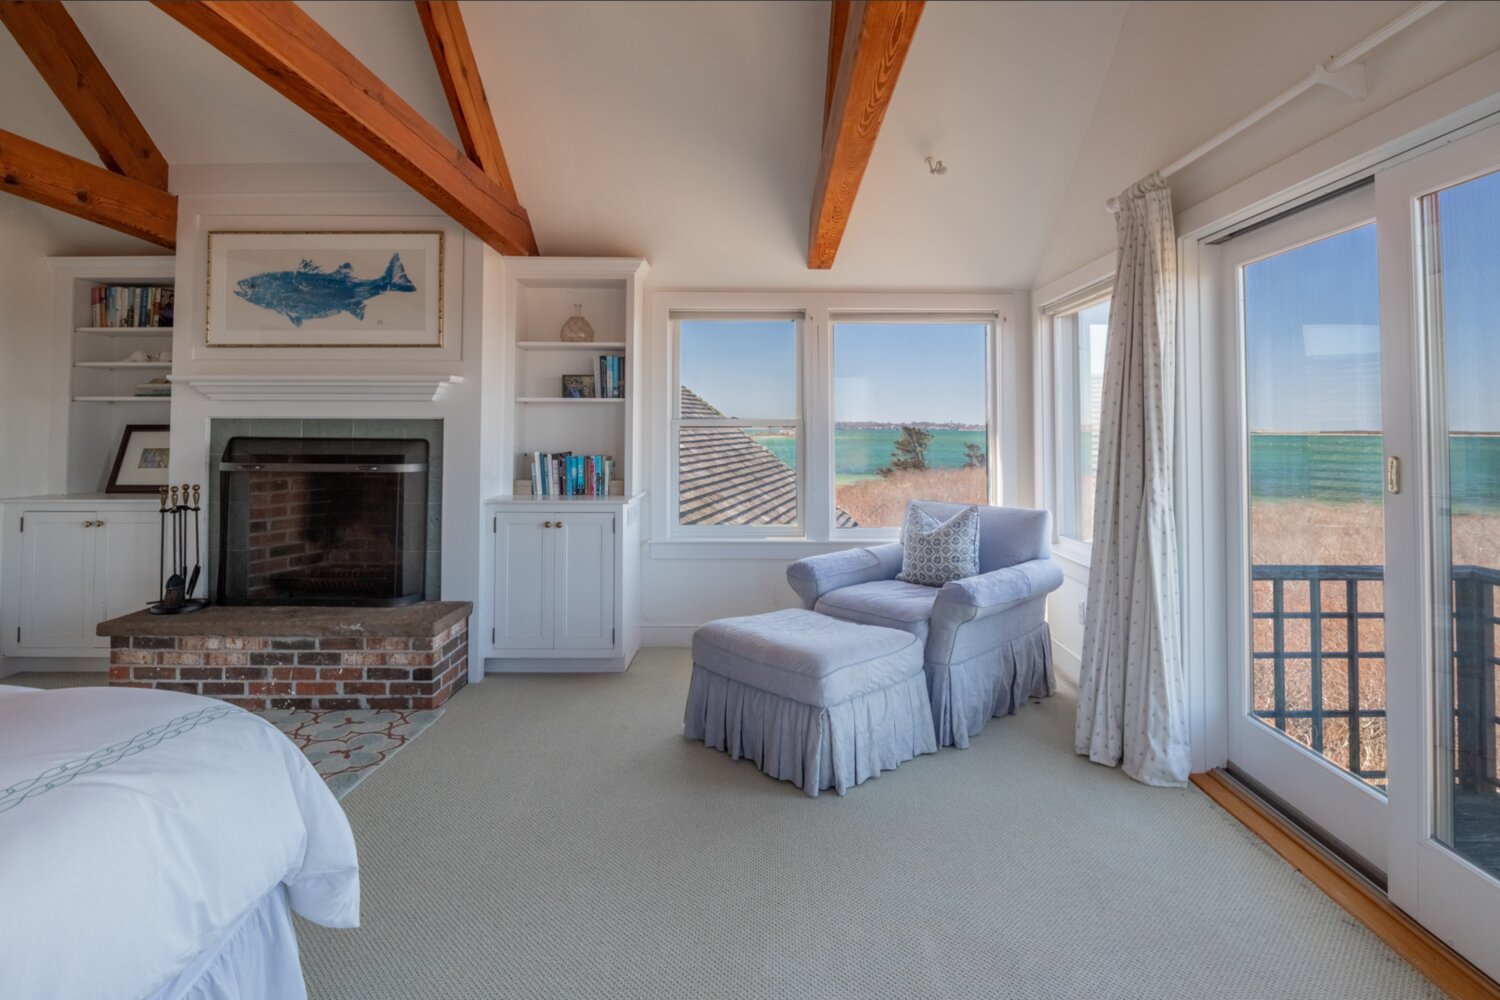 The master bedroom suite has a vaulted ceiling, a fireplace and a private deck with water views.